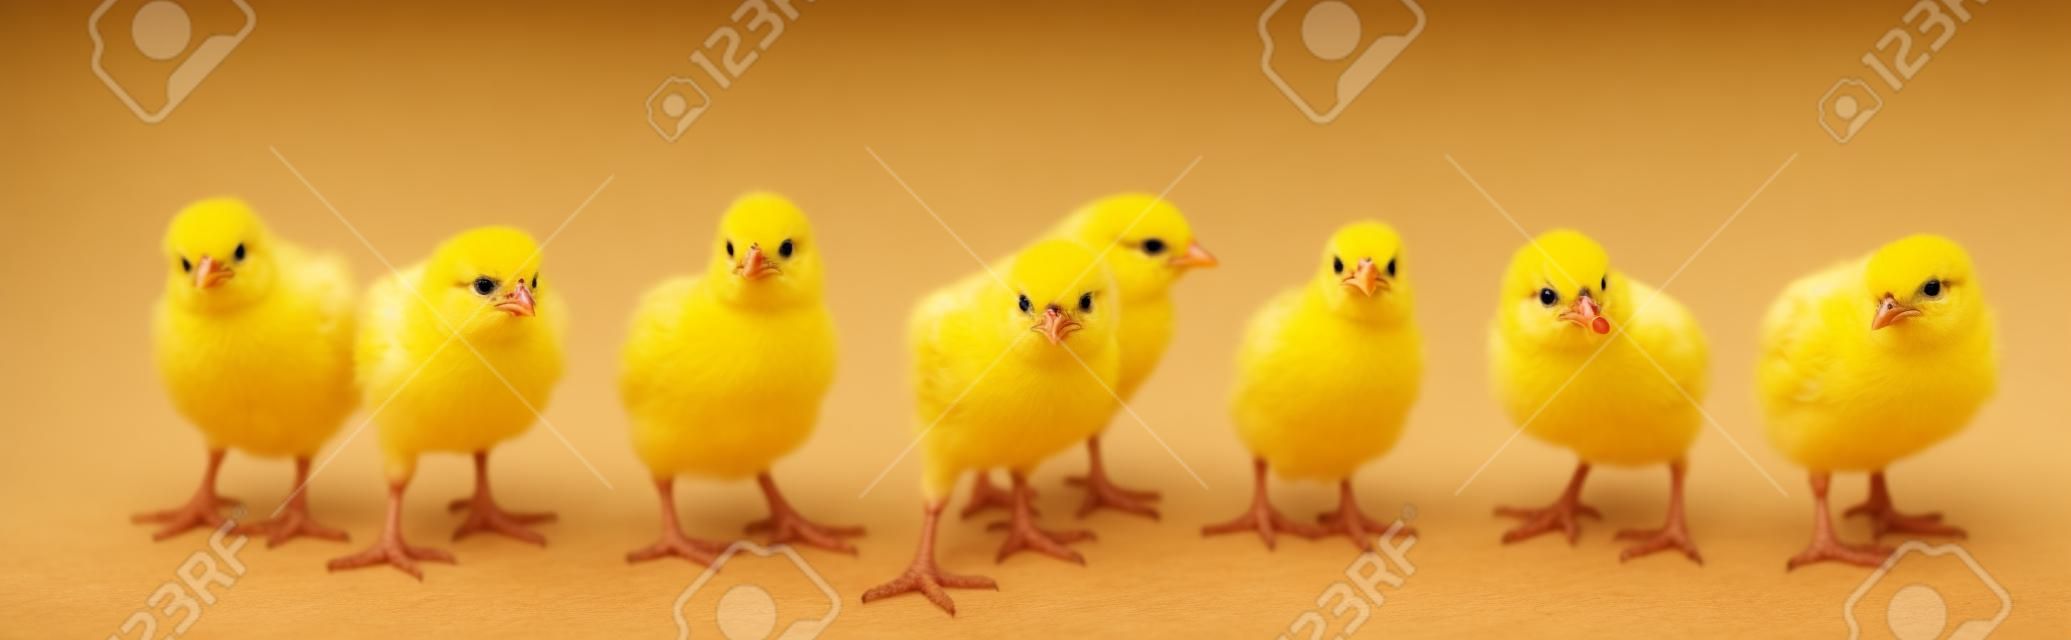 Panorama of brood little yellow chicks isolated on white background. Farm incubator chickens on walk.